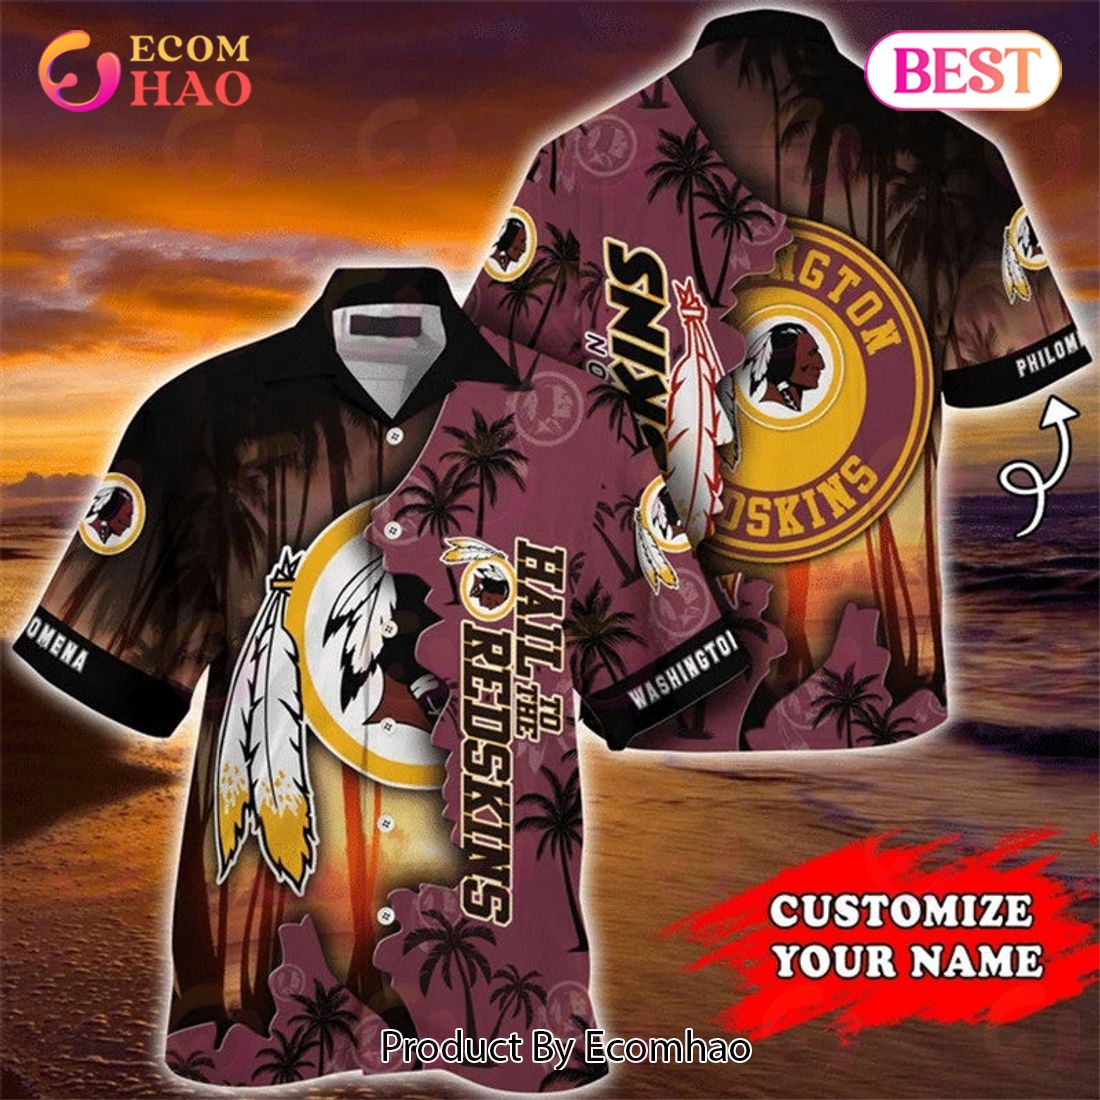 Best Selling Product] Personalize Name and Number WASHINGTON